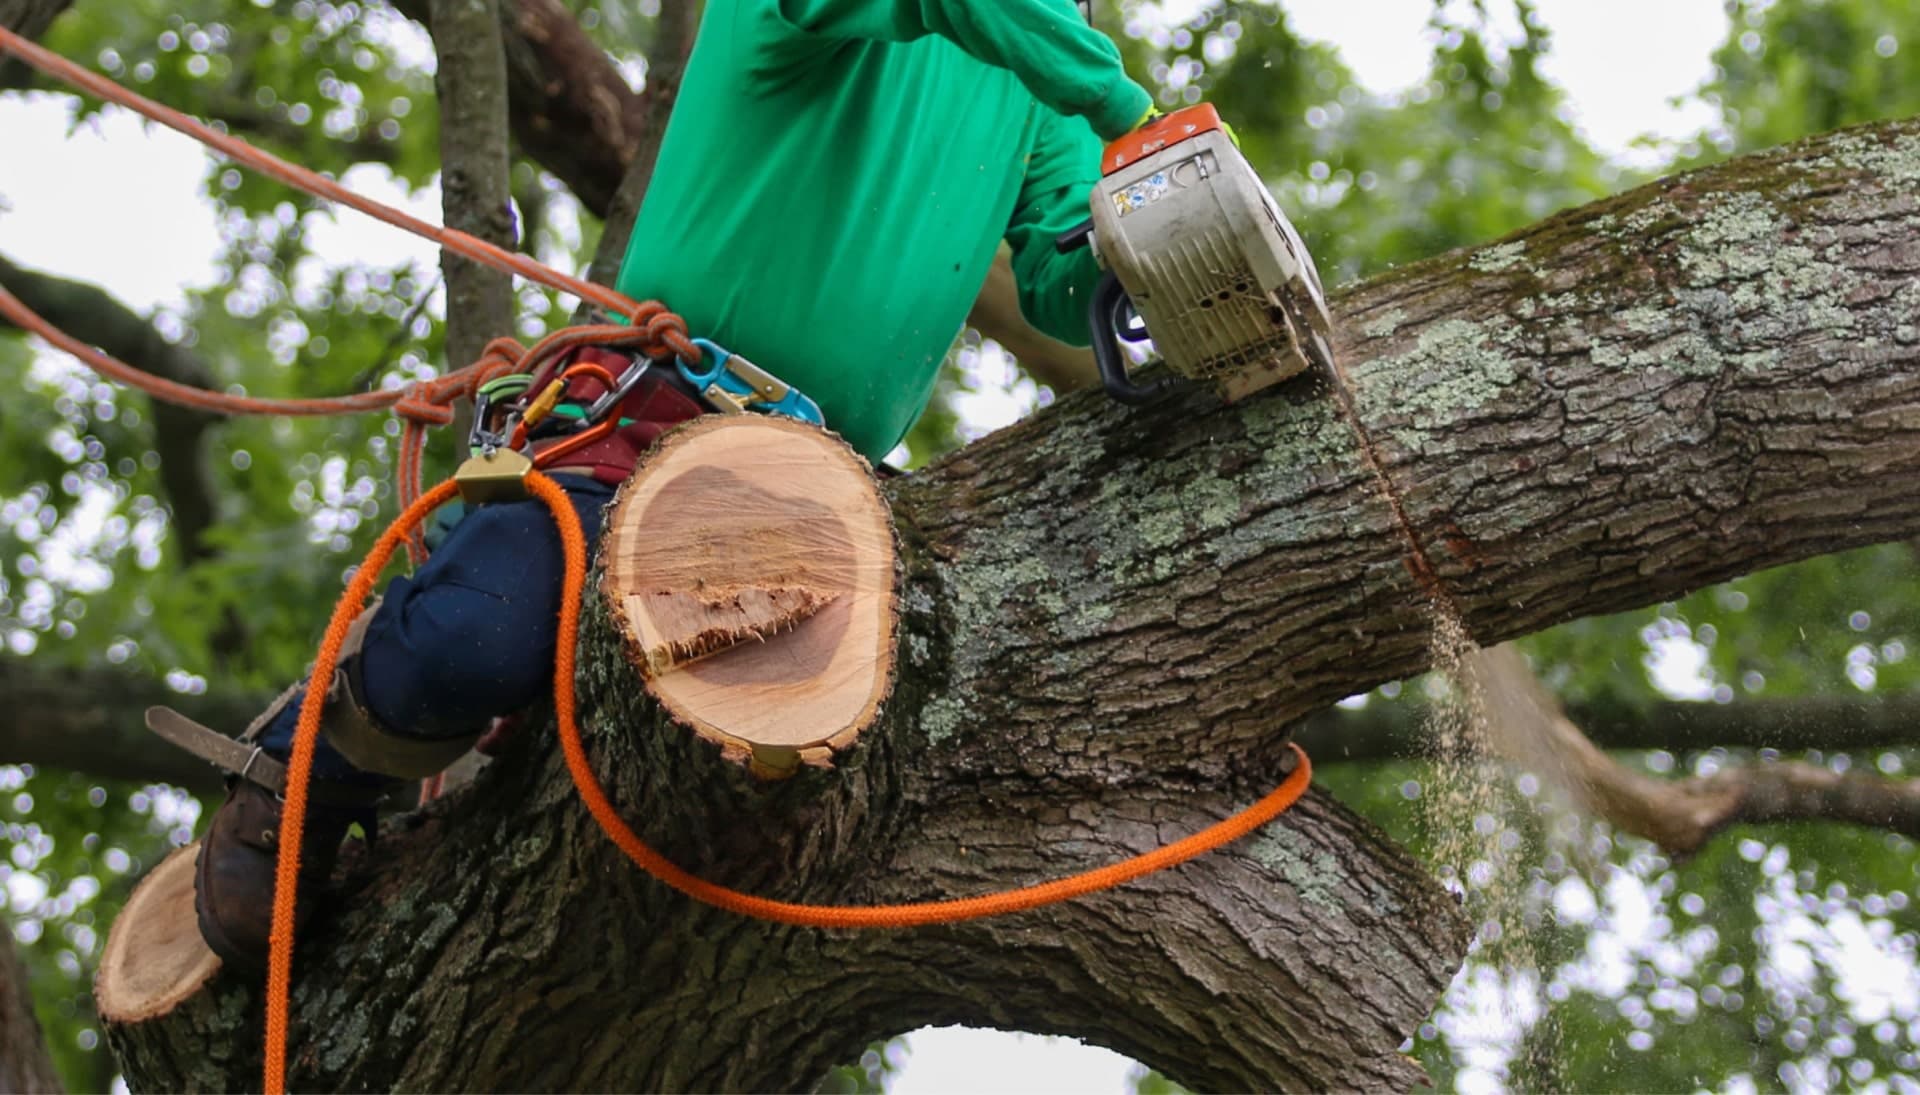 Shed your worries away with best tree removal in Huntington